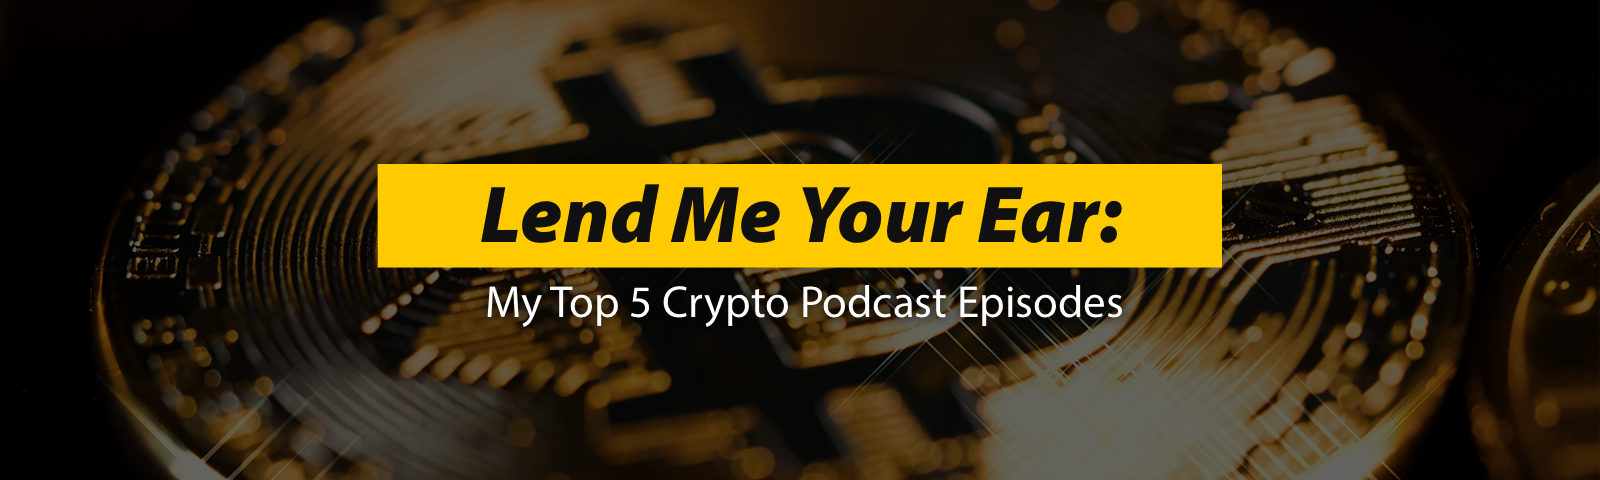 cryptocurrency podcast episode